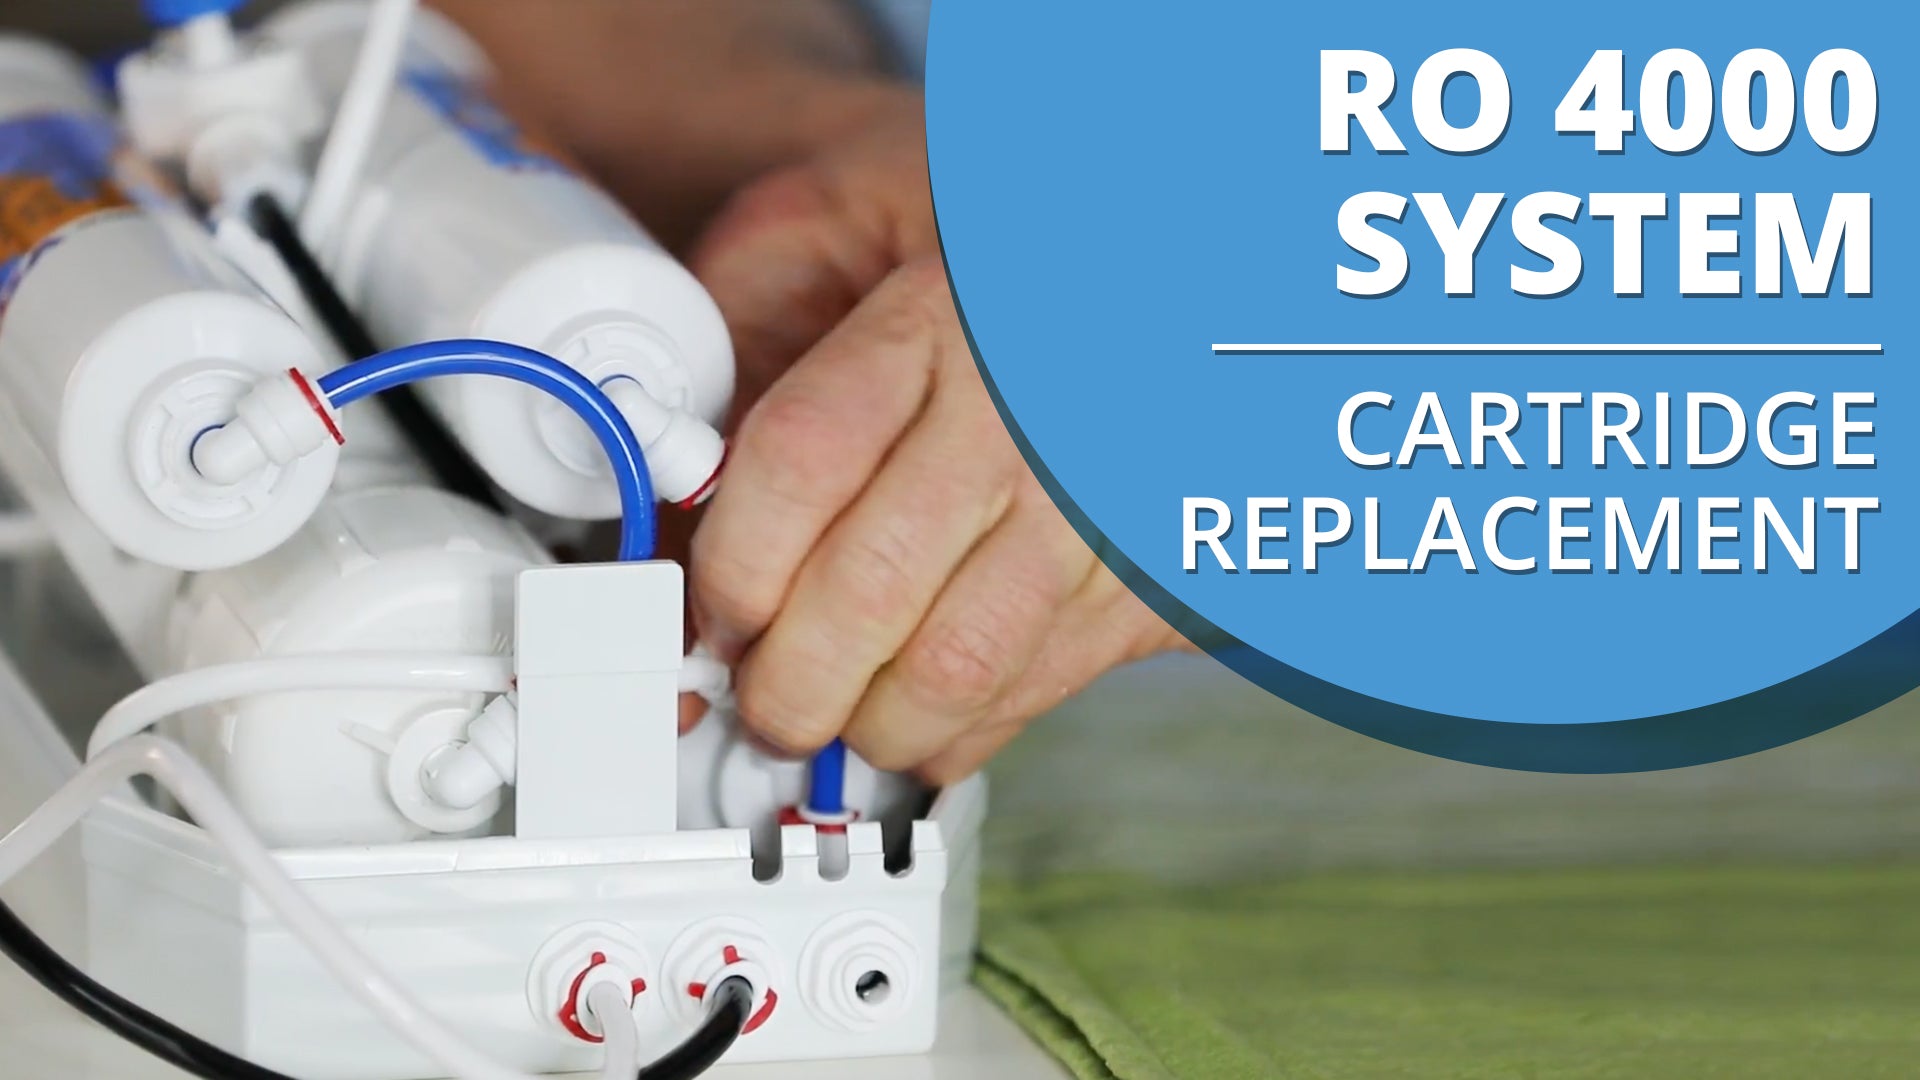 [VIDEO] How to change the cartridge in your My Water Filter Benchtop Reverse Osmosis RO 4000 System